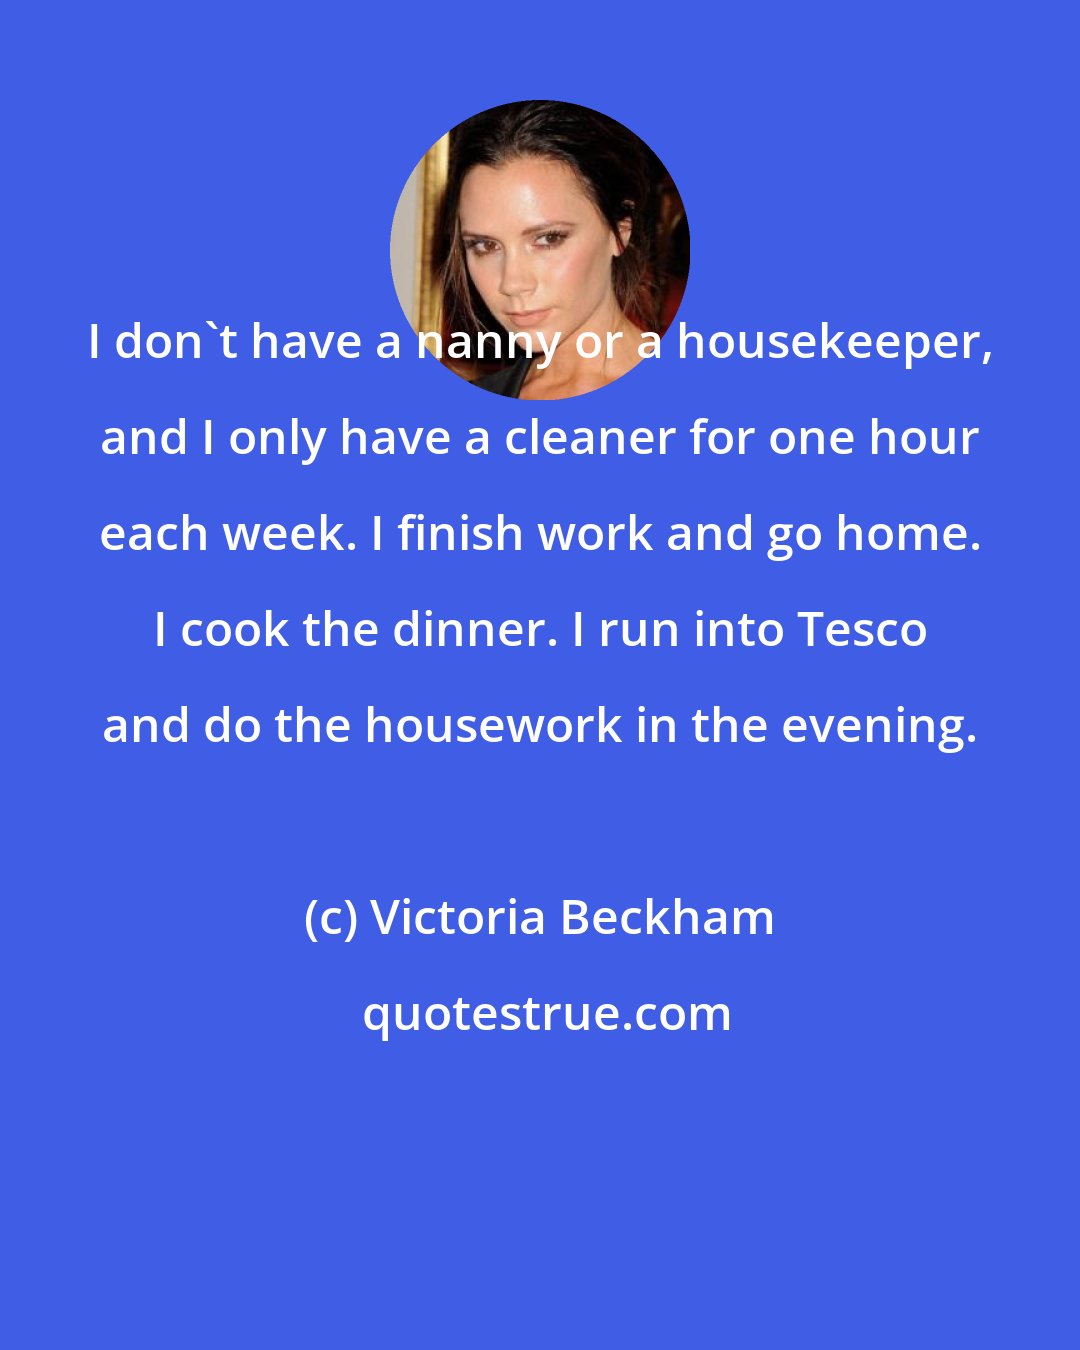 Victoria Beckham: I don't have a nanny or a housekeeper, and I only have a cleaner for one hour each week. I finish work and go home. I cook the dinner. I run into Tesco and do the housework in the evening.